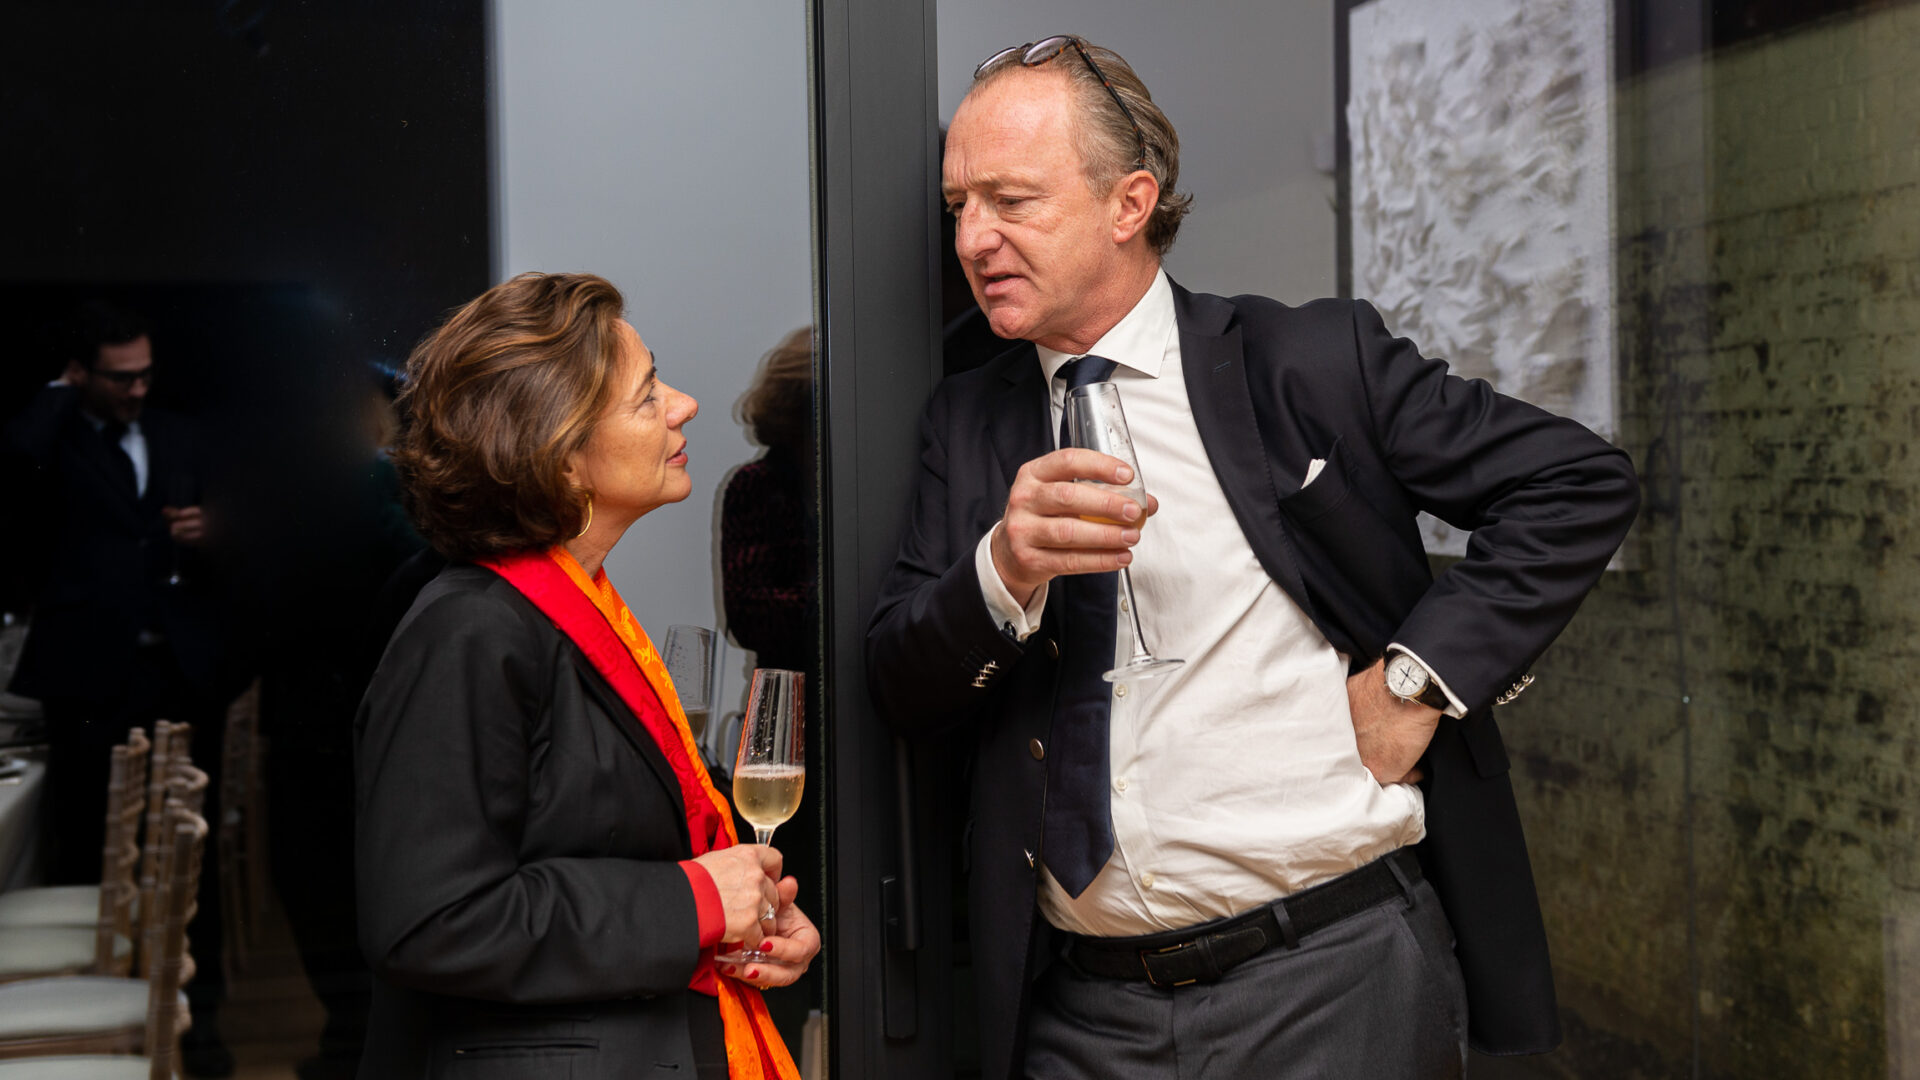 Belgium Sothebys Int. Realty An evening with Montblanc NL